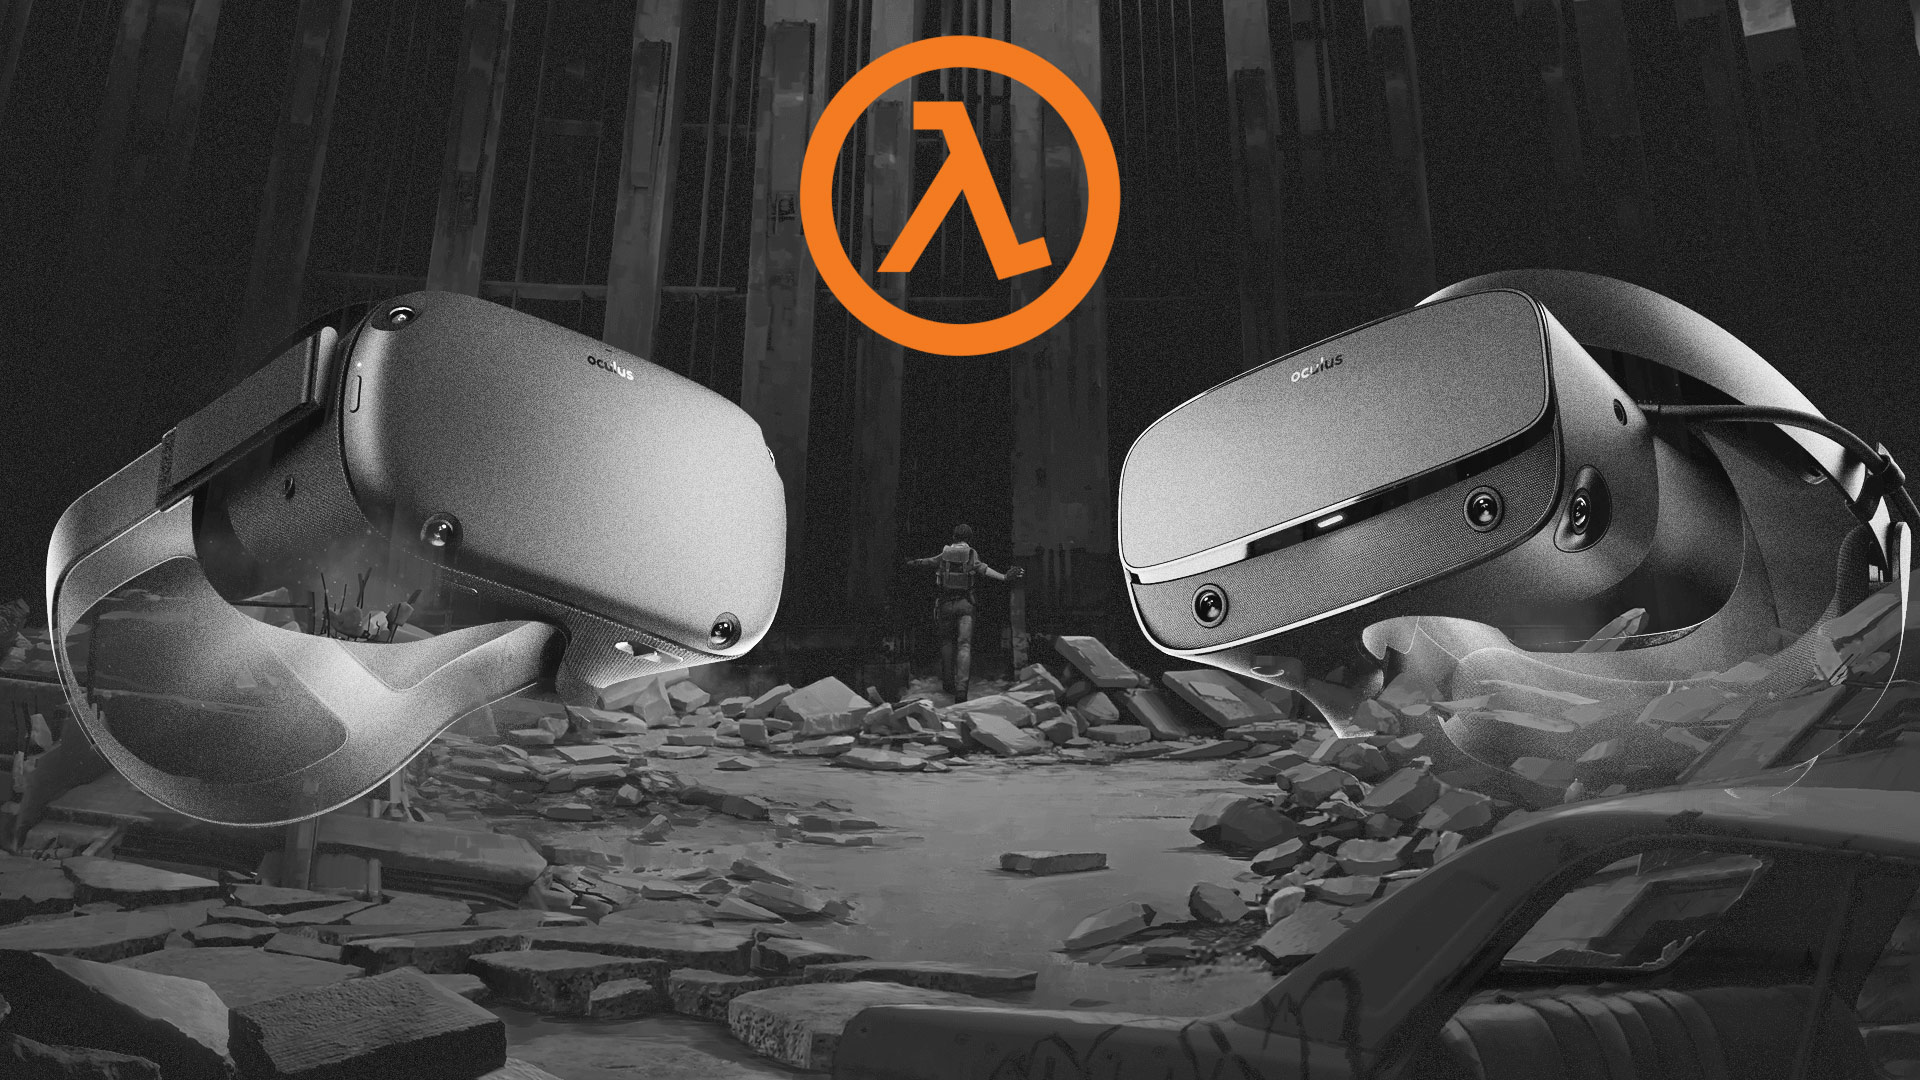 Without Valve, Half-Life: Alyx Wouldn't Work with Oculus Rift or Quest